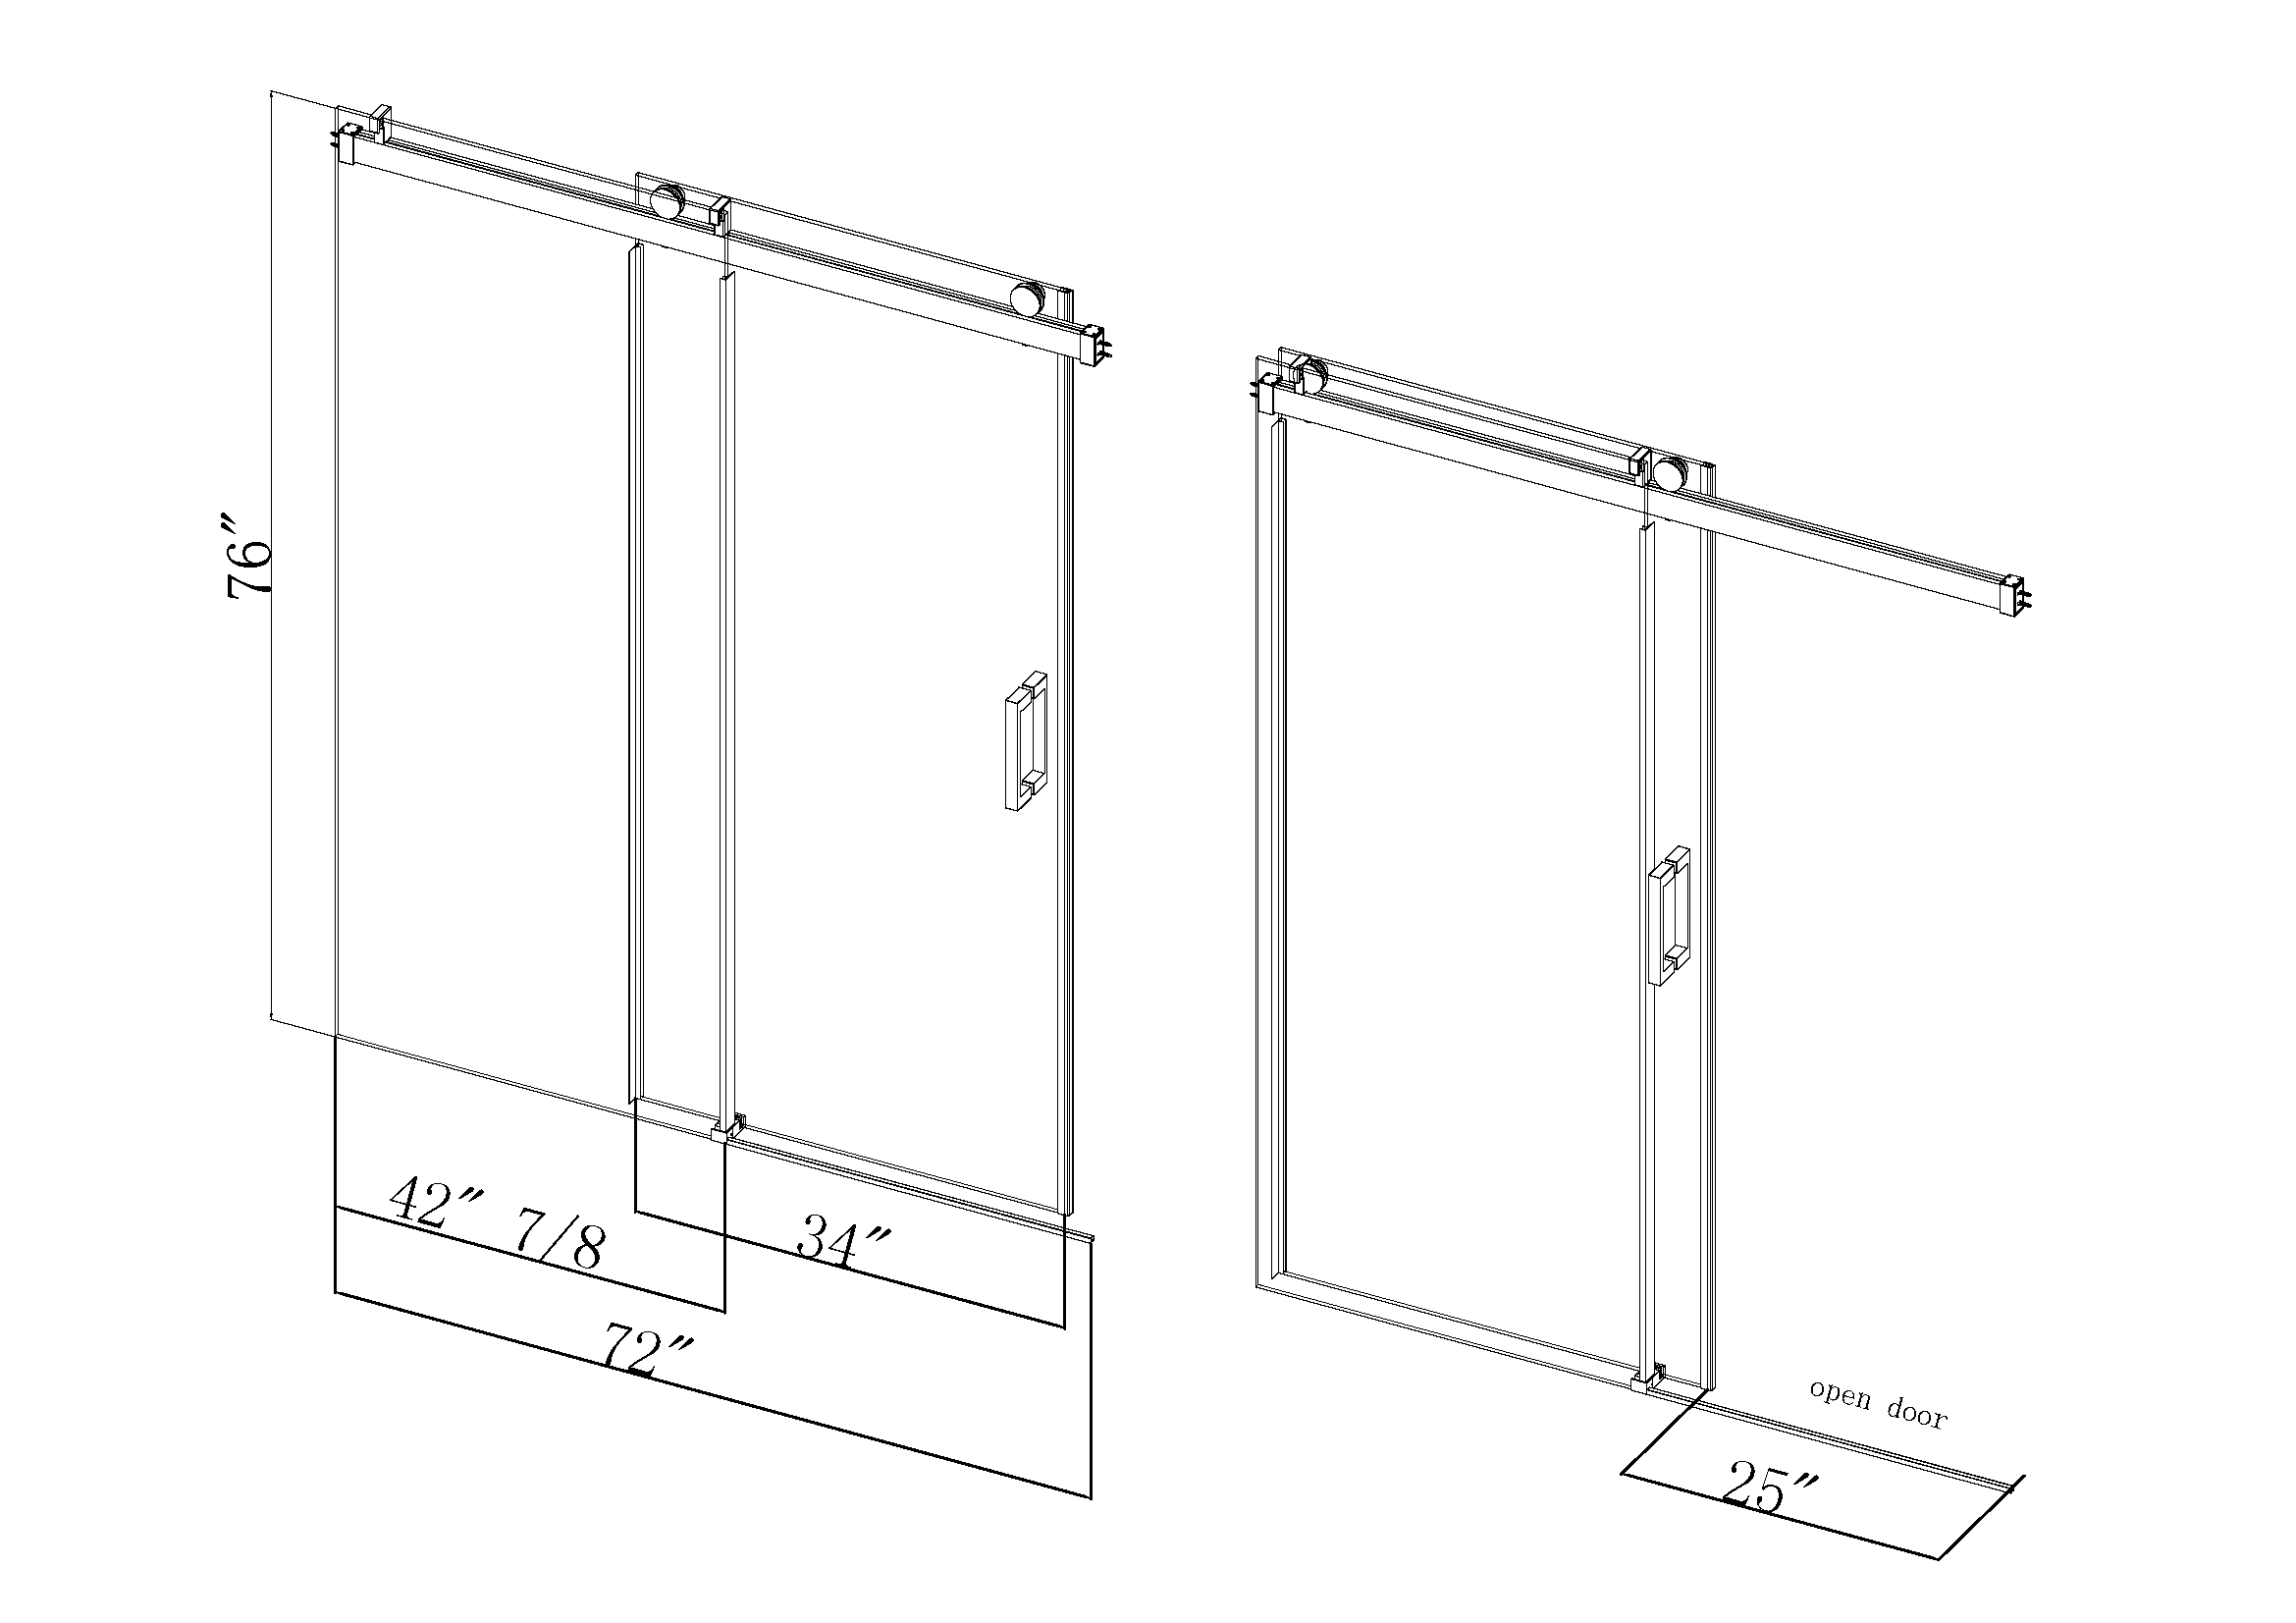 68 to 72 in. W x 76 in. H Sliding Frameless Soft-Close Shower Door with Premium 3/8 Inch